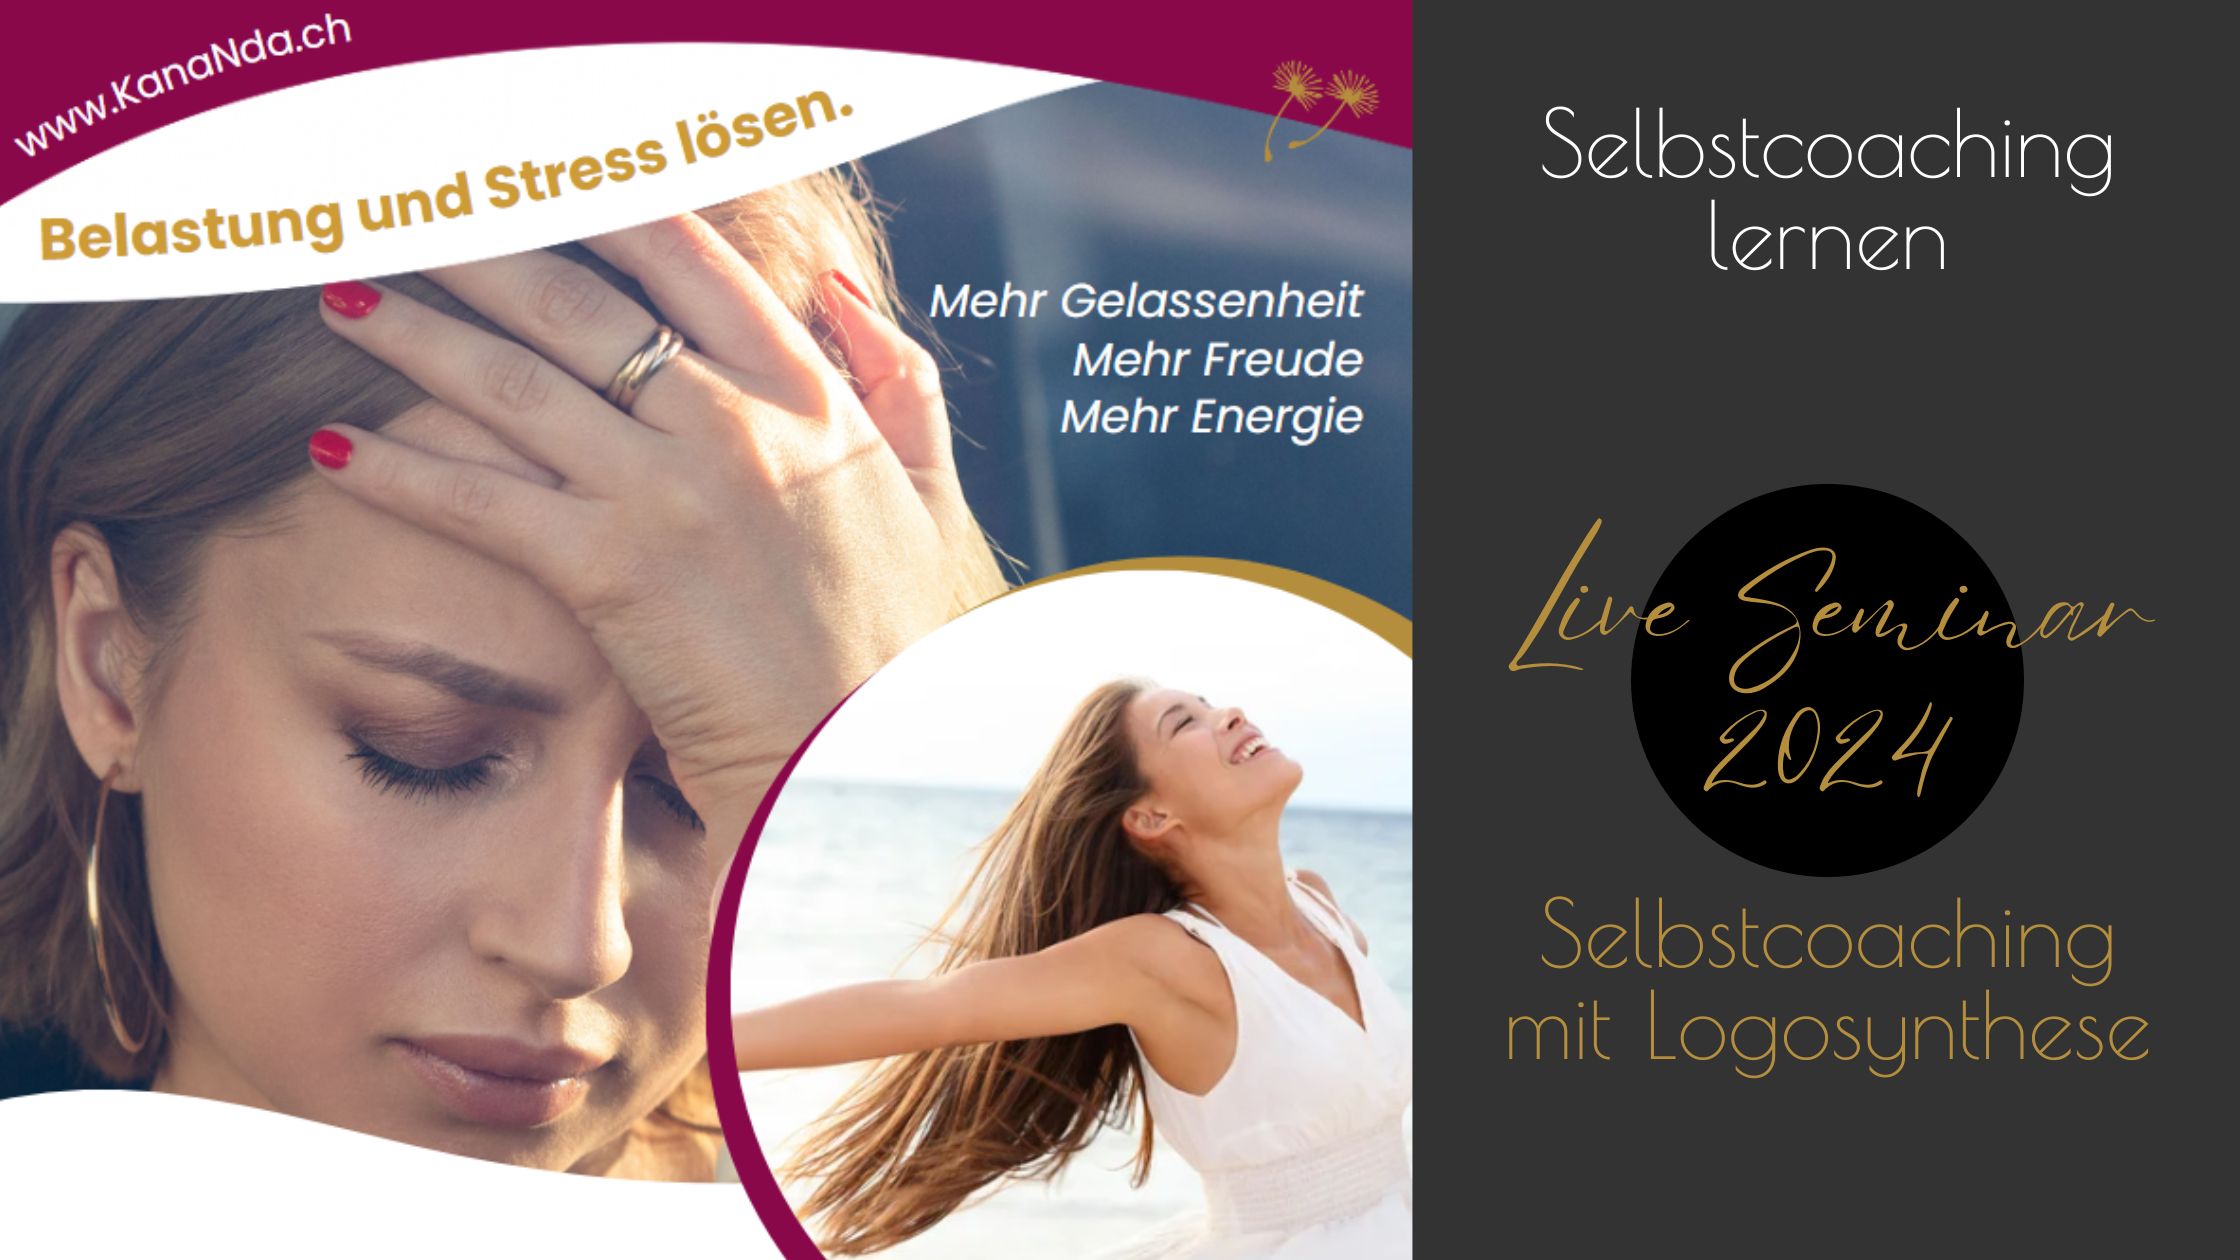 Selbstcoaching mit Logosynthese